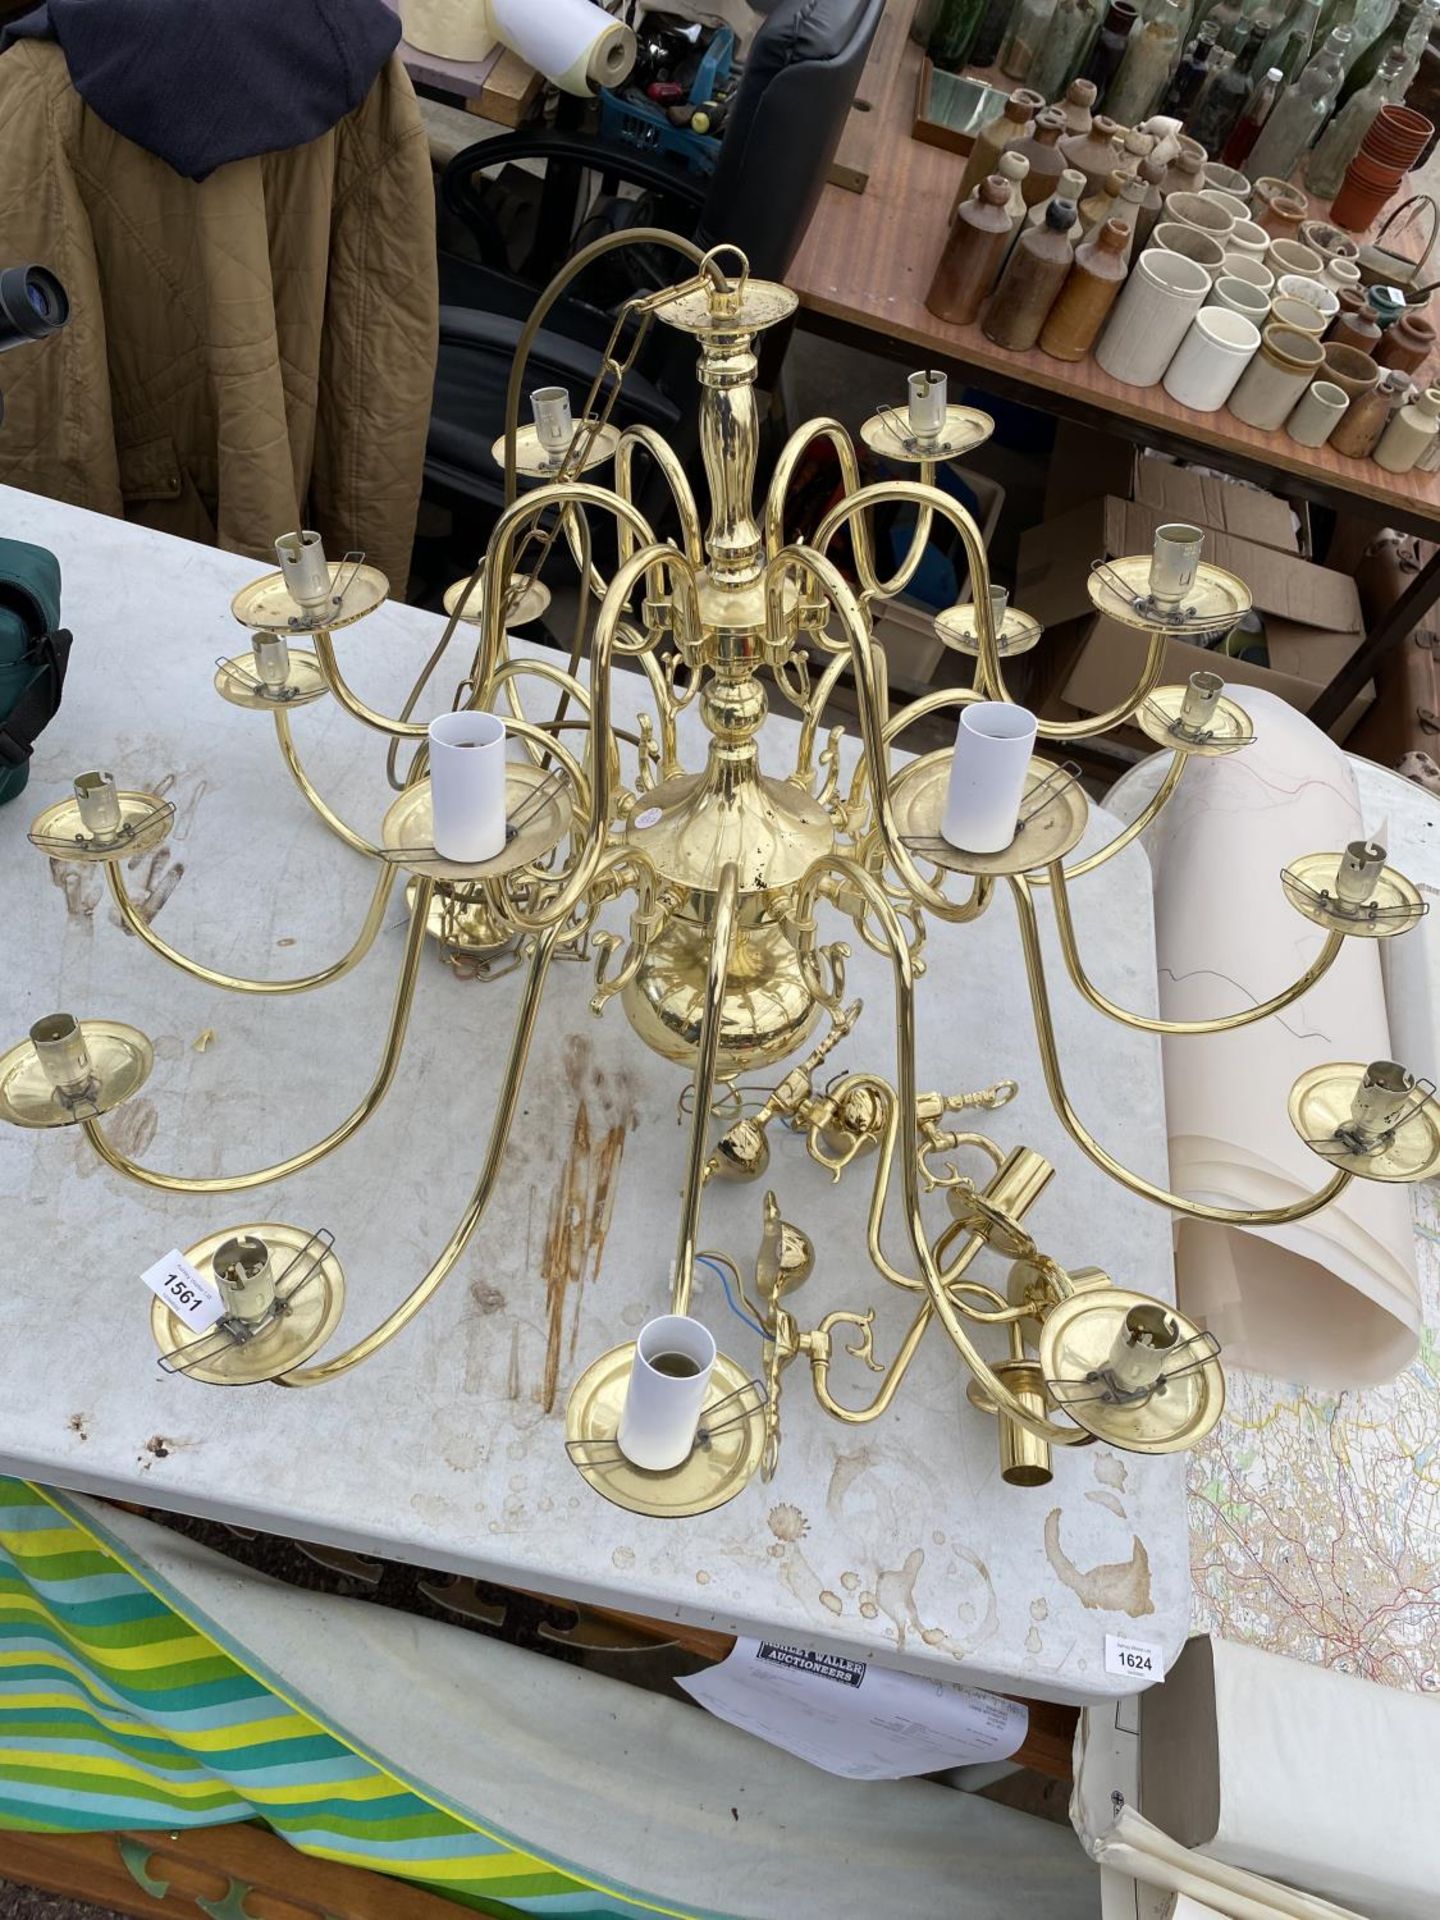 A LARGE GILT CHANDELIER STYLE LIGHT FITTING - Image 2 of 3